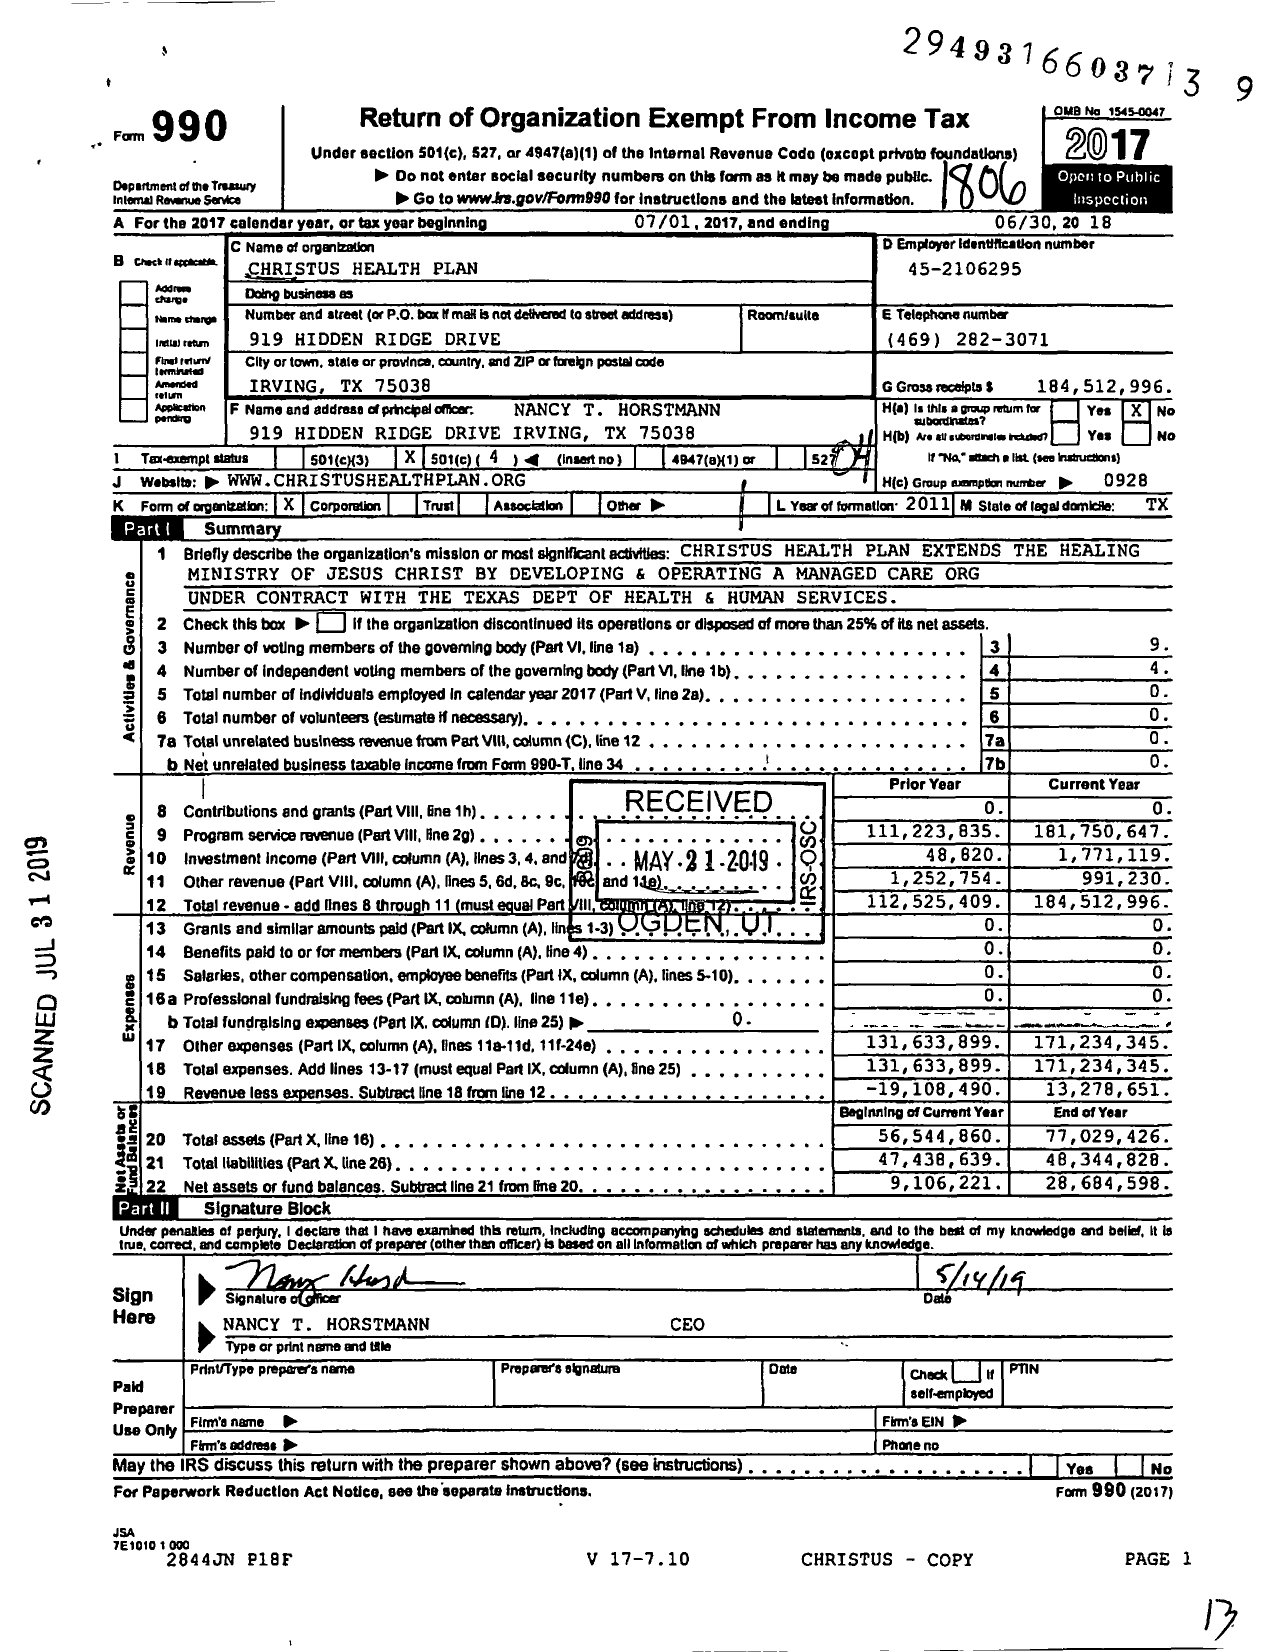 Image of first page of 2017 Form 990O for CHRISTUS Health Plan (CHP)